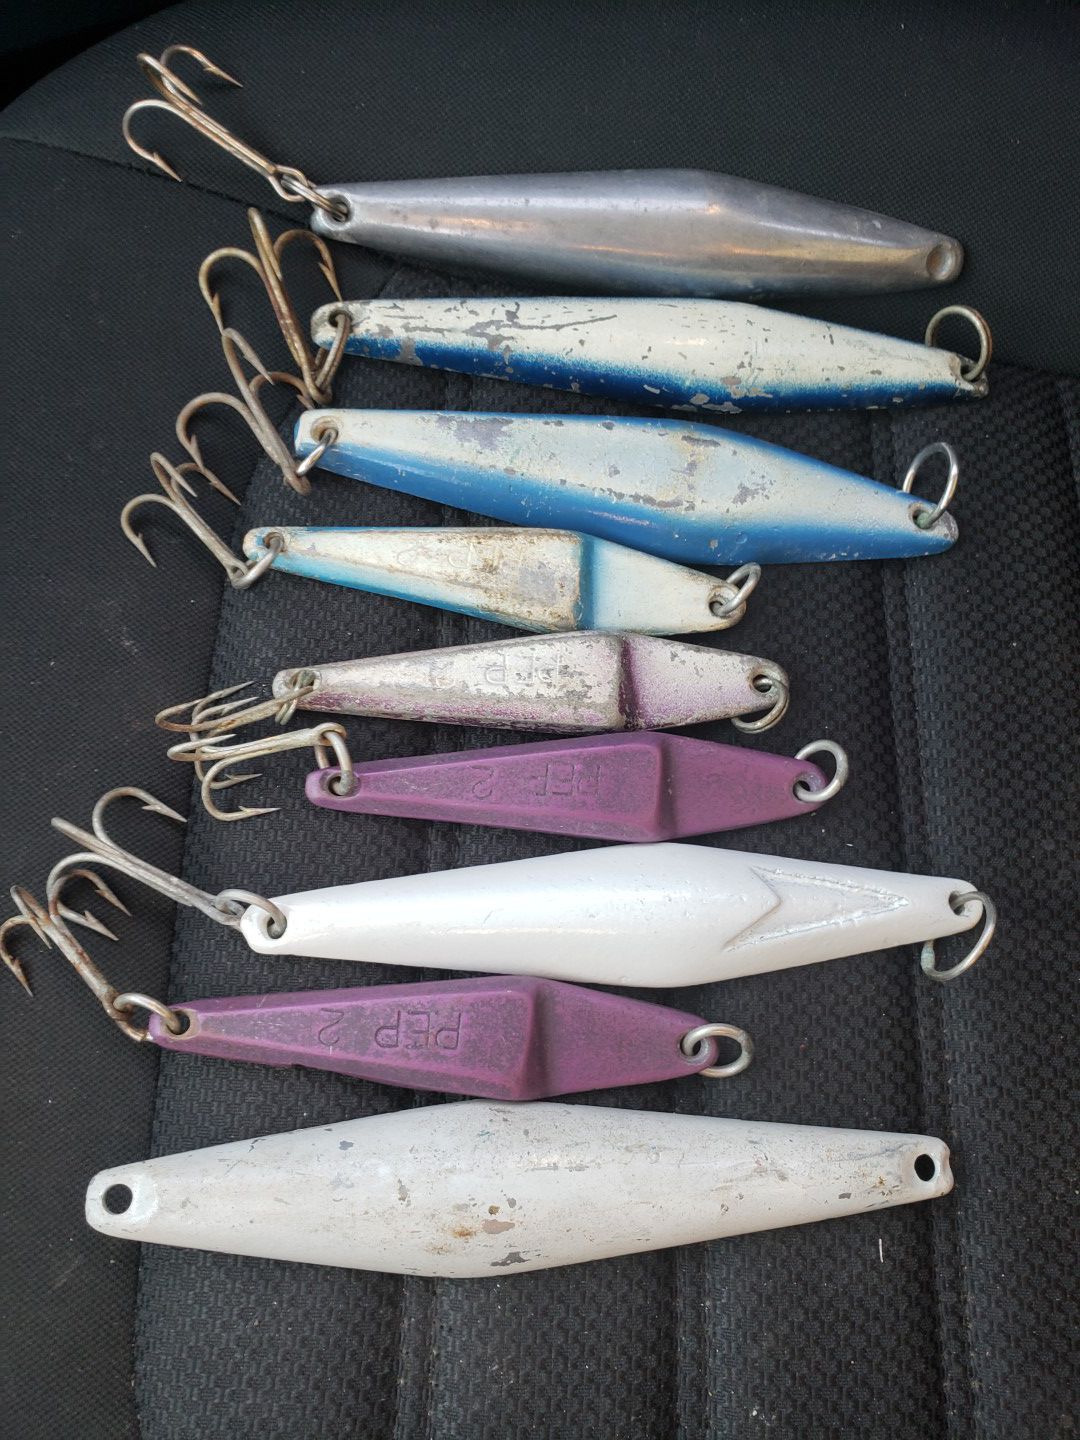 Jigs surface irons lures fishing